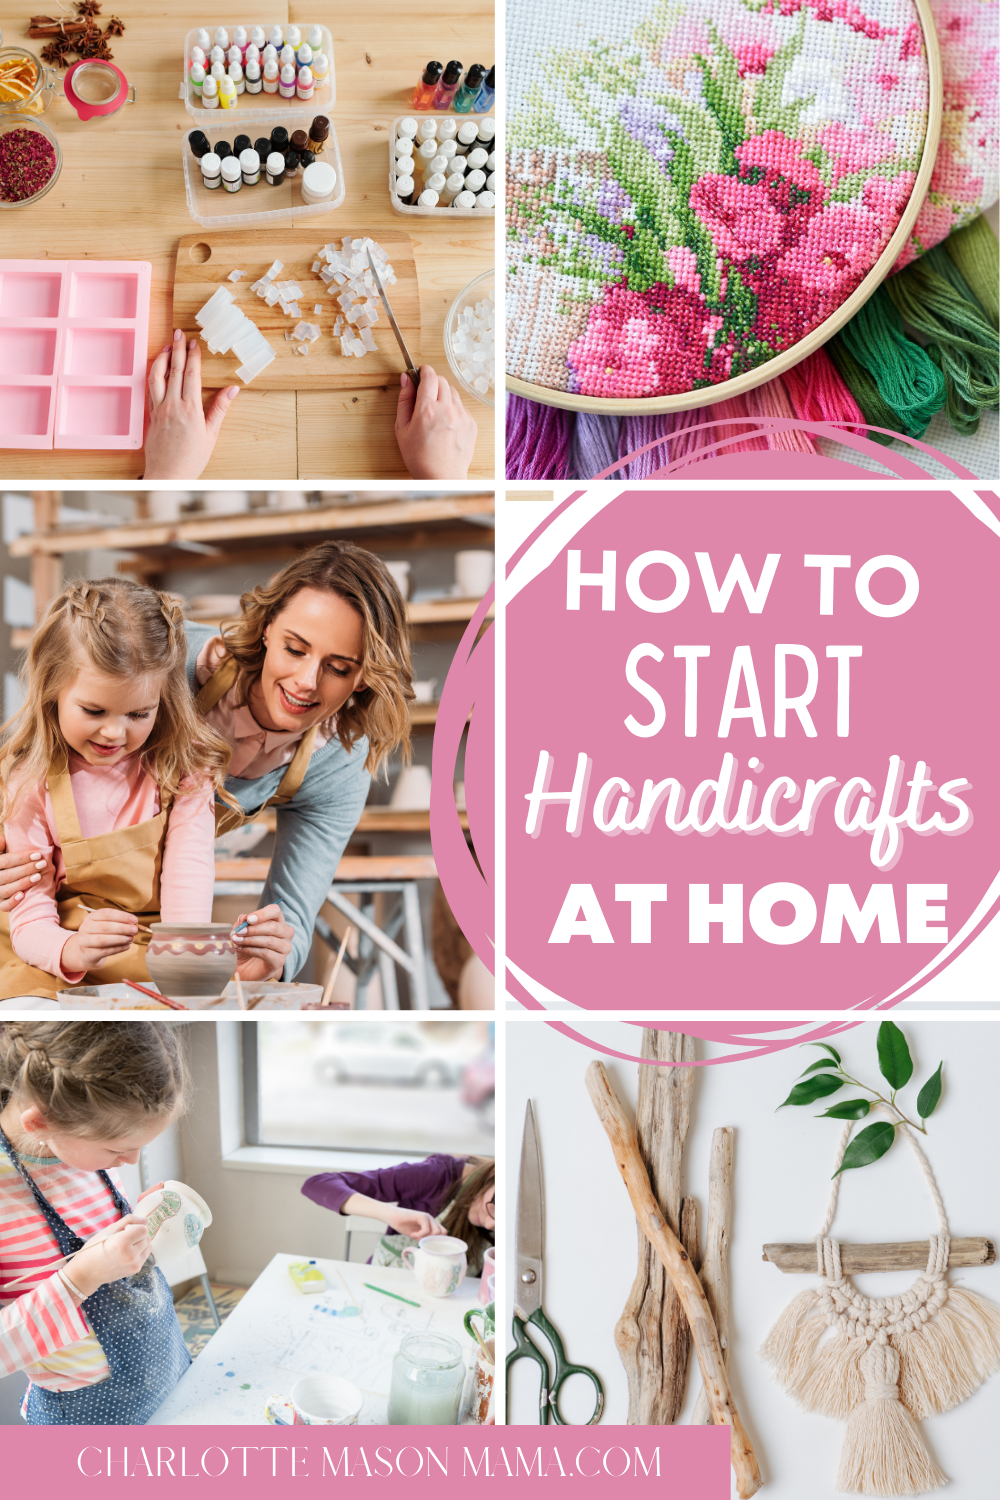 How to Start Handicrafts at Home (Plus a list of 10 ideas)